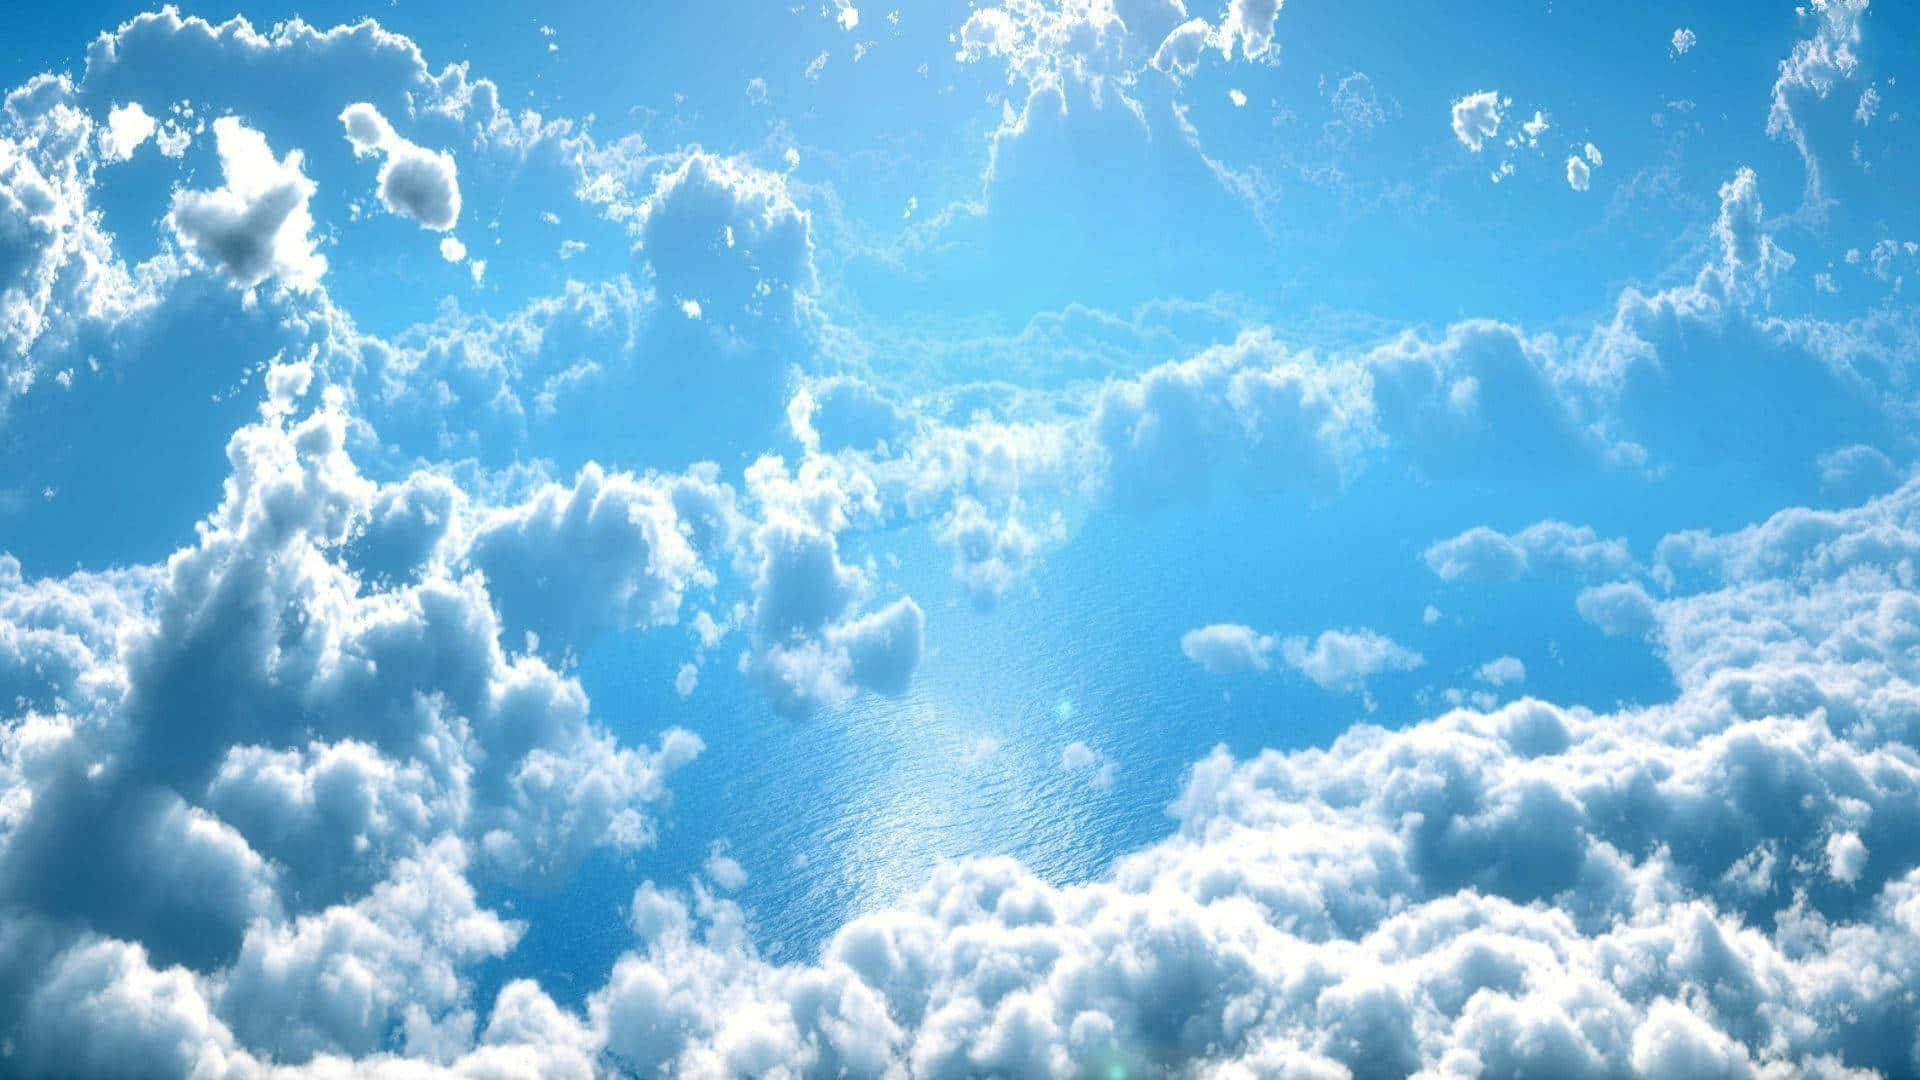 The beauty of Heaven's clouds